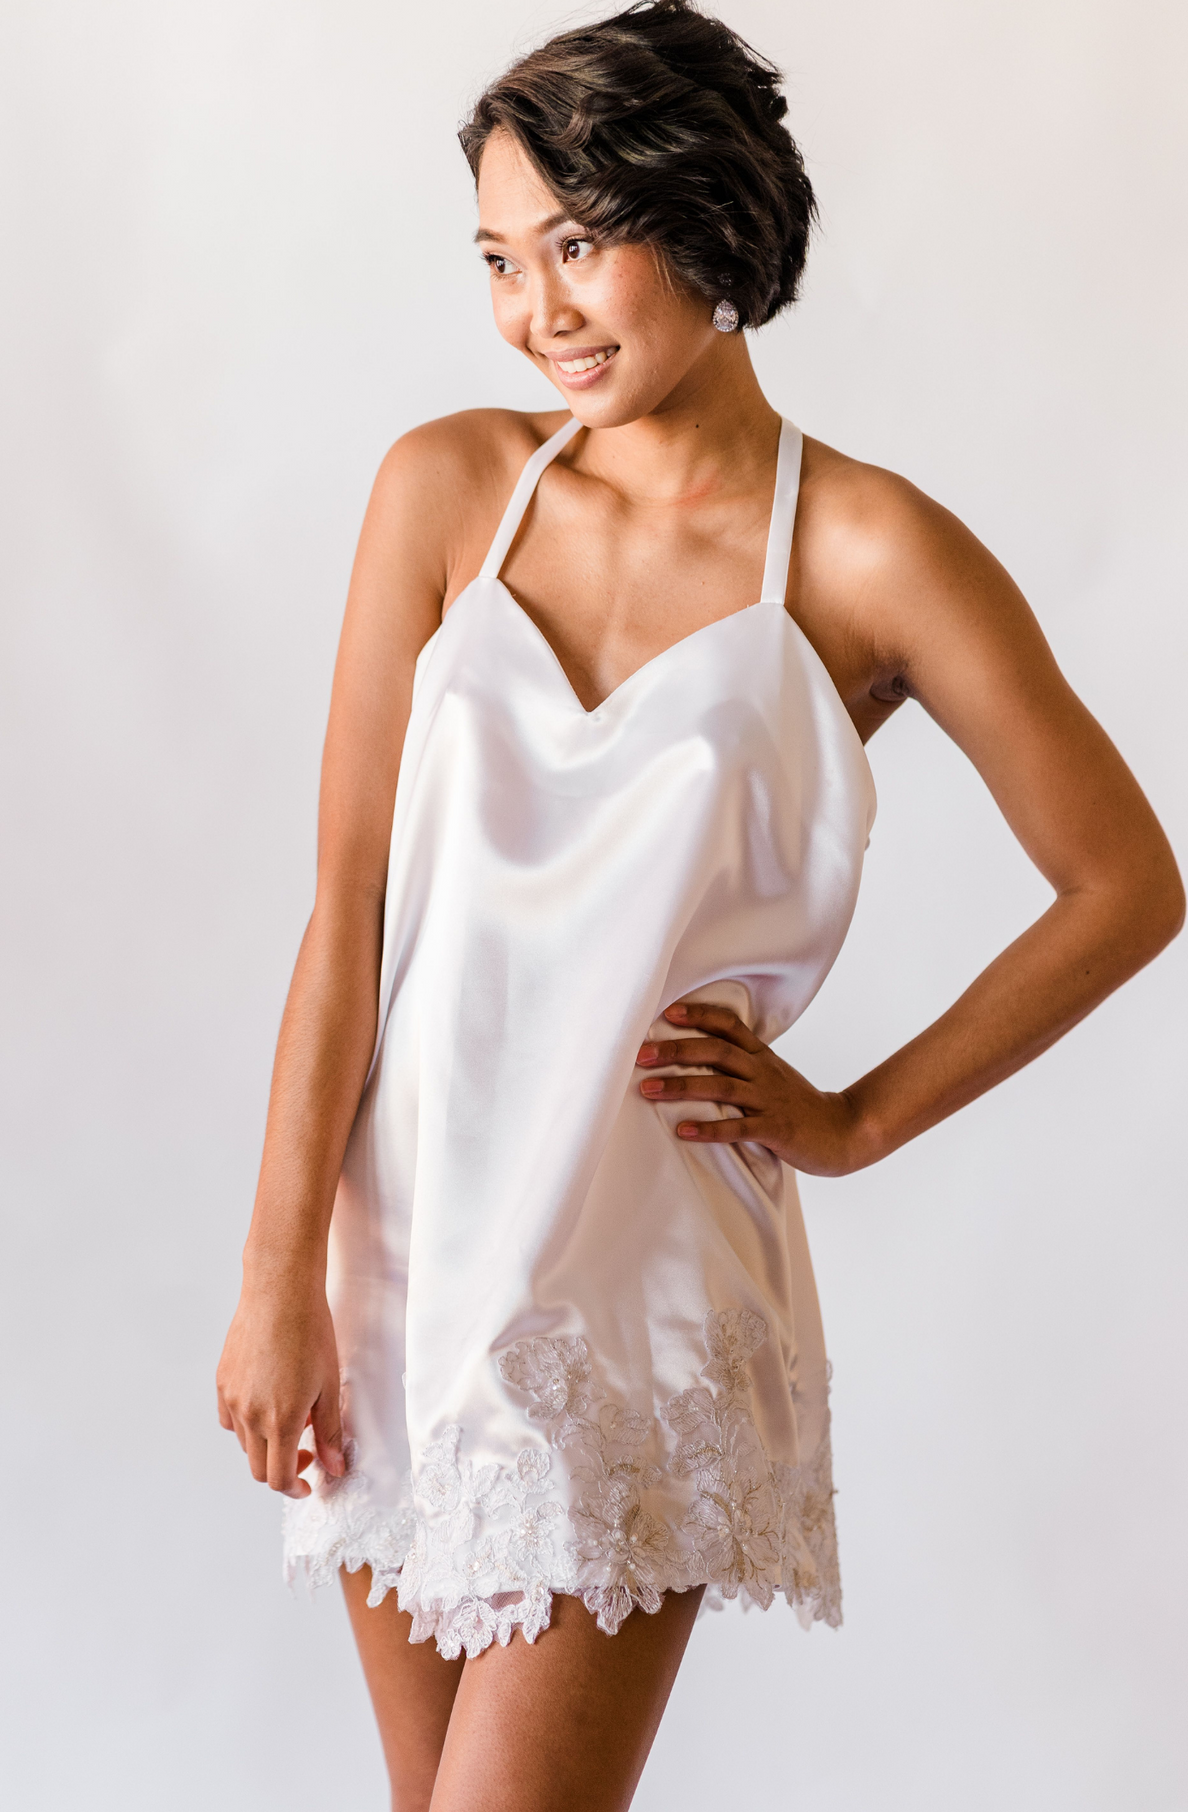 Top tips to transform your wedding dress into an evening gown – no